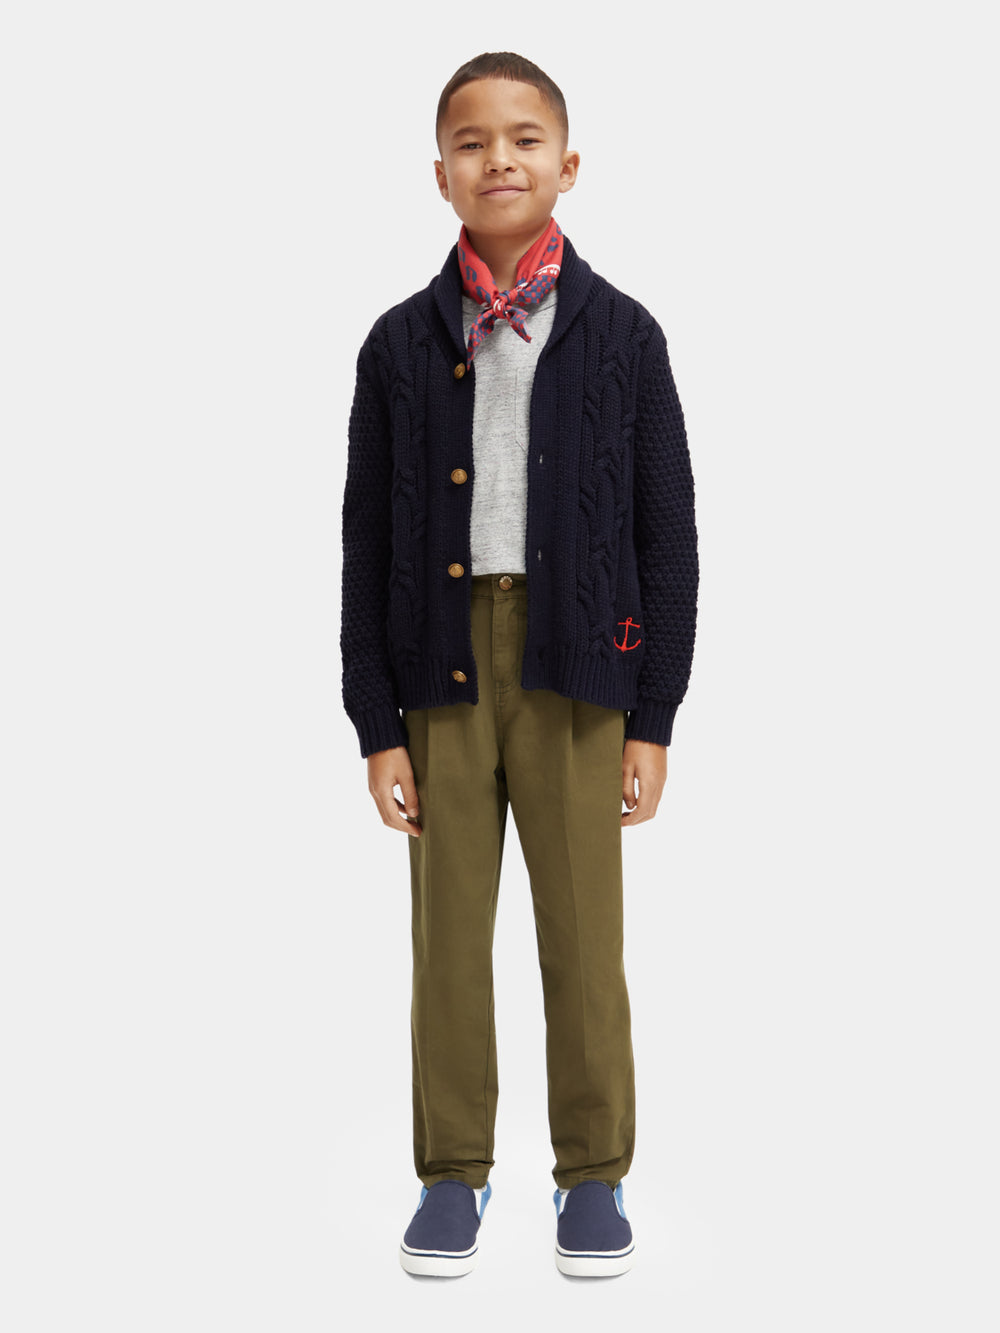 Kids - Loose-tapered fit pleated chino - Scotch & Soda NZ